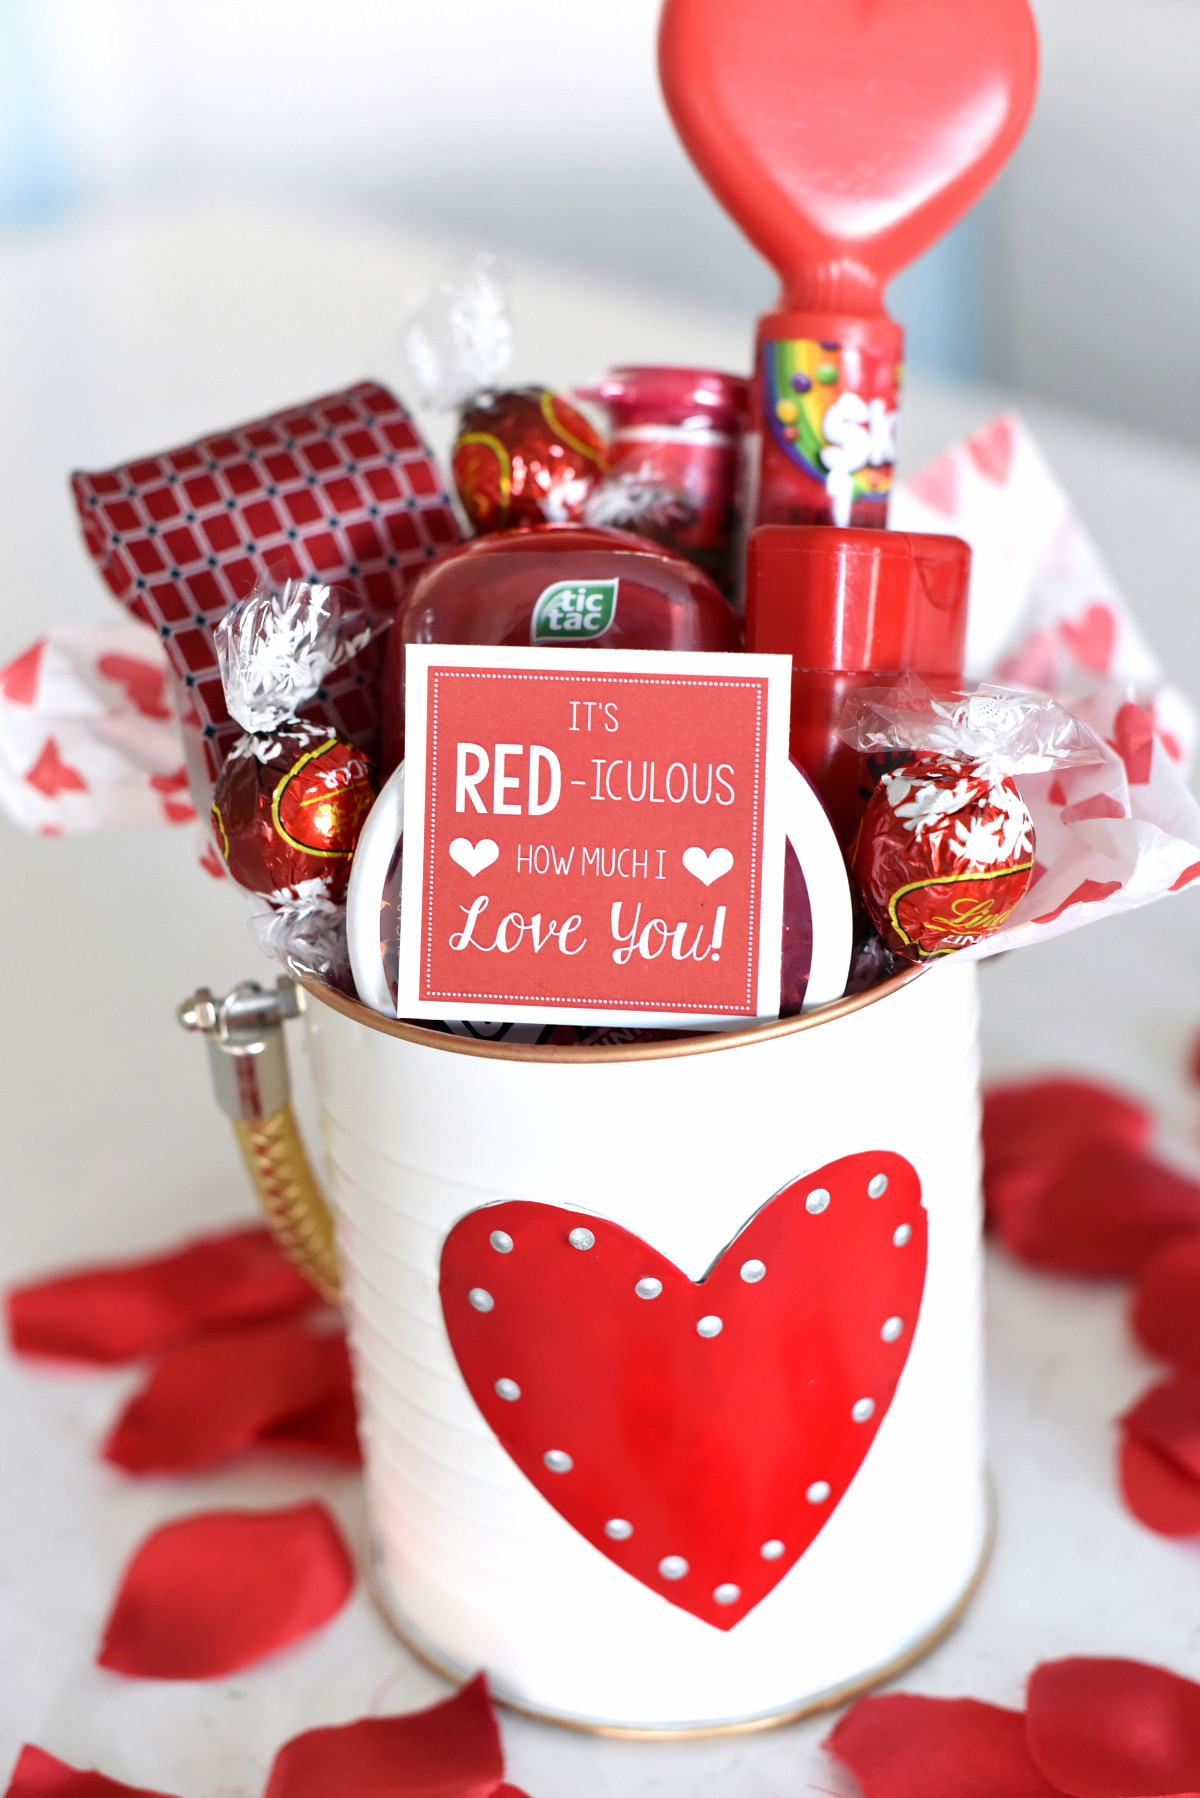 Man Valentines Day Gift Ideas
 Cute Valentine s Day Gift Idea RED iculous Basket